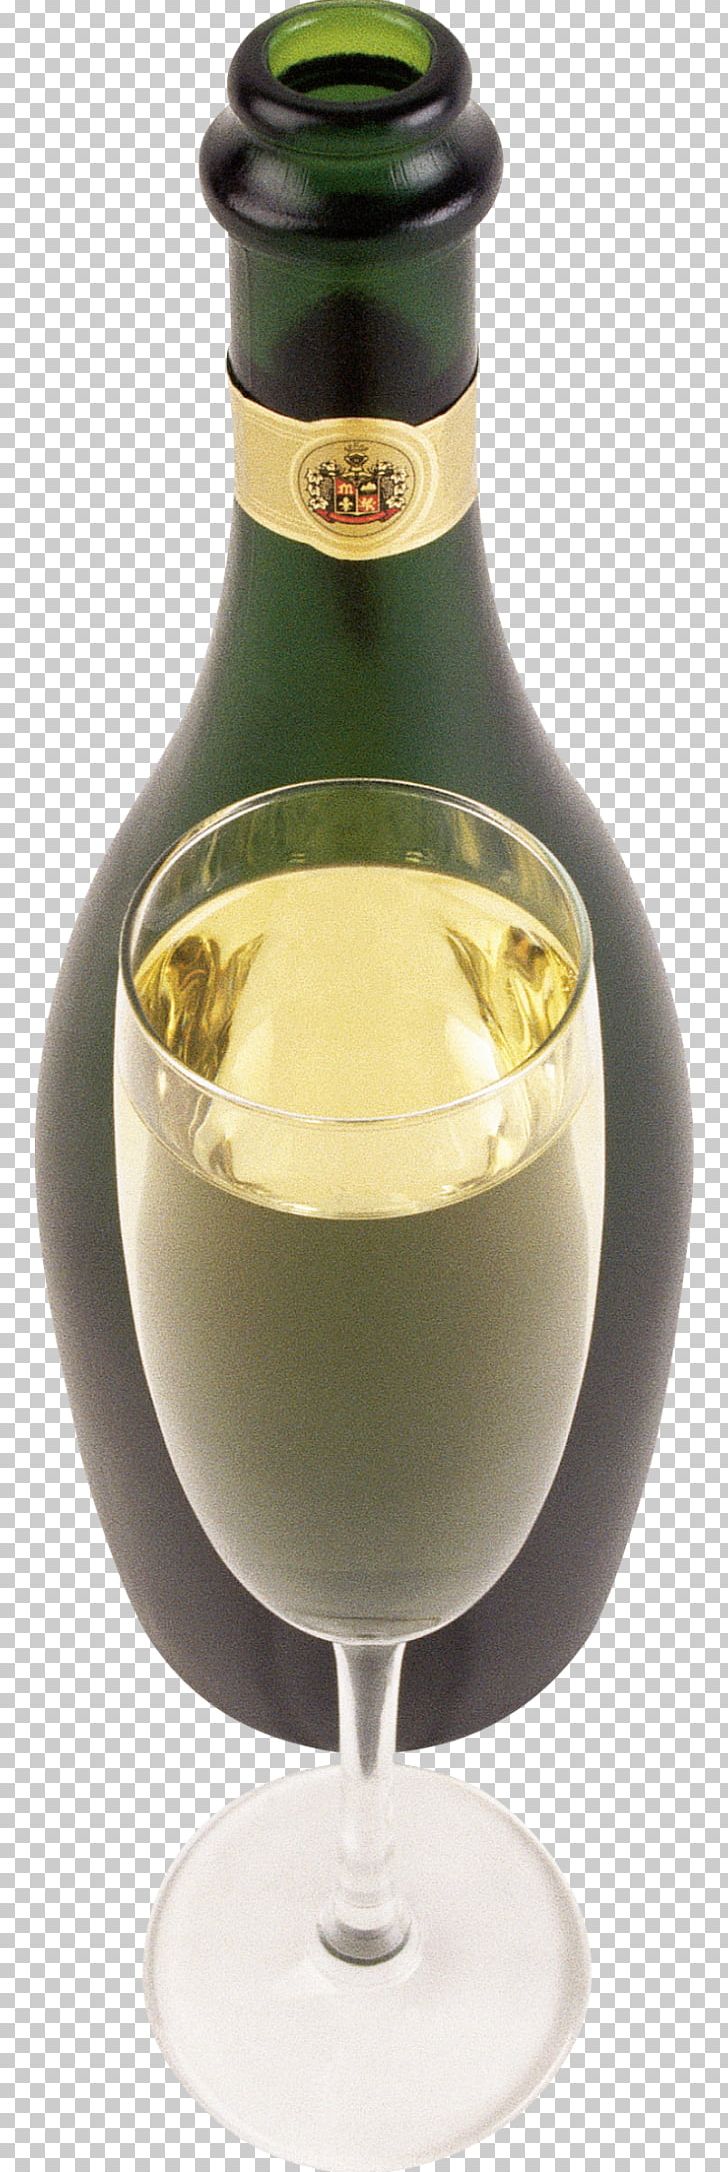 Red Wine Champagne Bottle PNG, Clipart, Barware, Bottle, Champagne, Drink, Food Drinks Free PNG Download